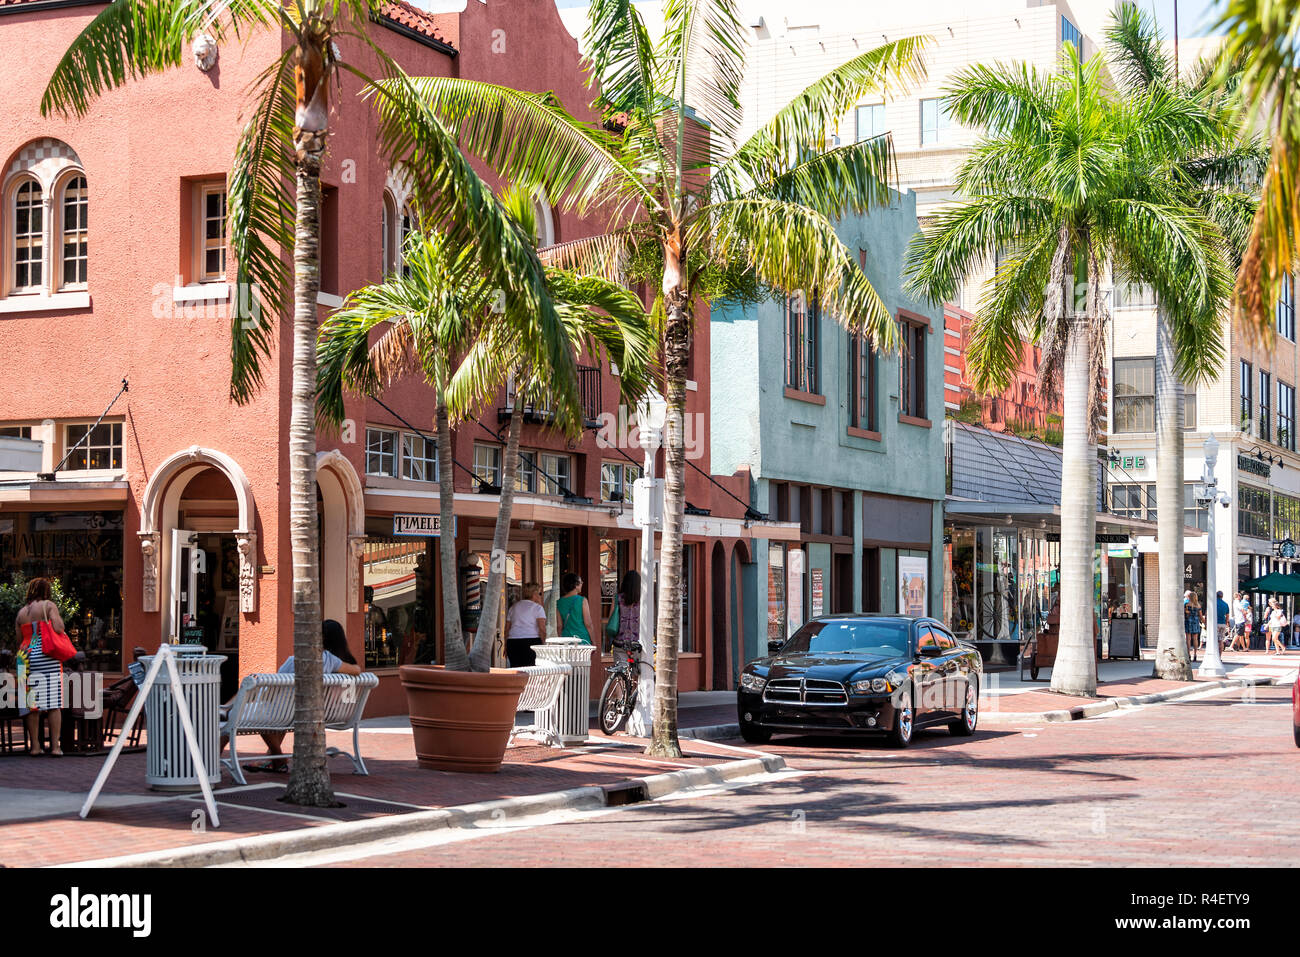 Fort Myers, USA - April 29, 2018: City town street during sunny day in Florida gulf of mexico coast, shopping, restaurants Stock Photo